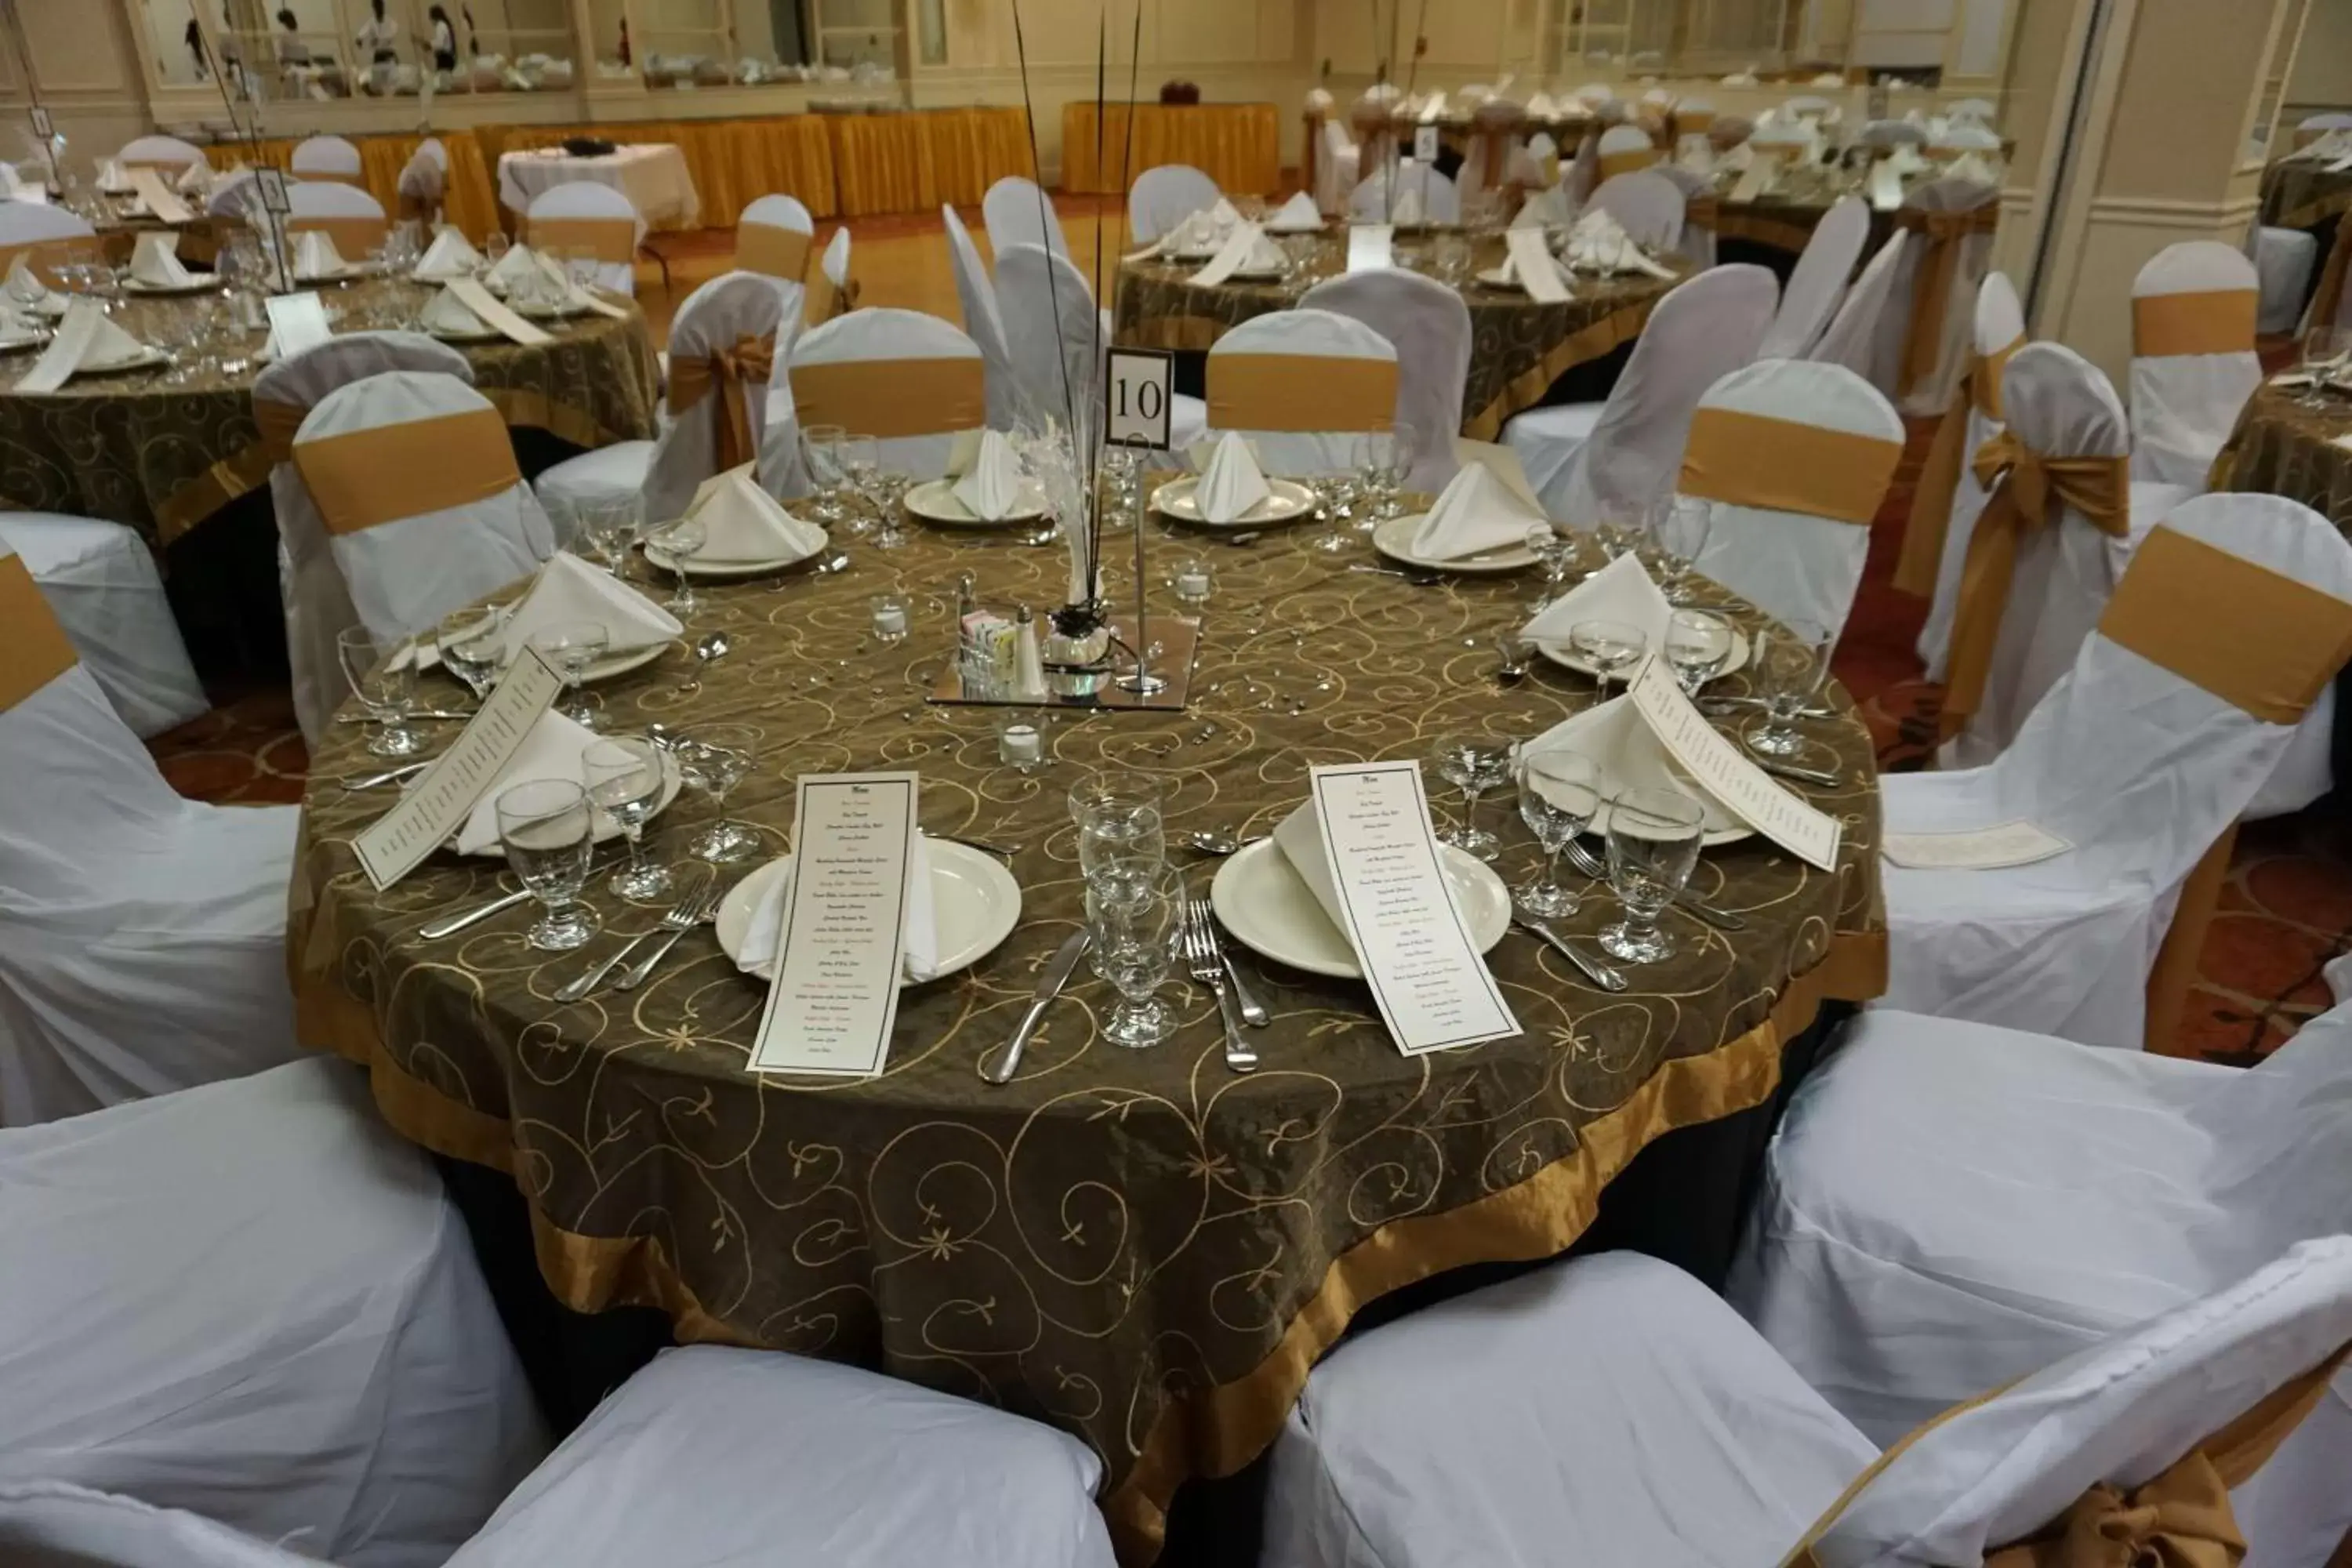 On site, Banquet Facilities in Best Western Capital Beltway